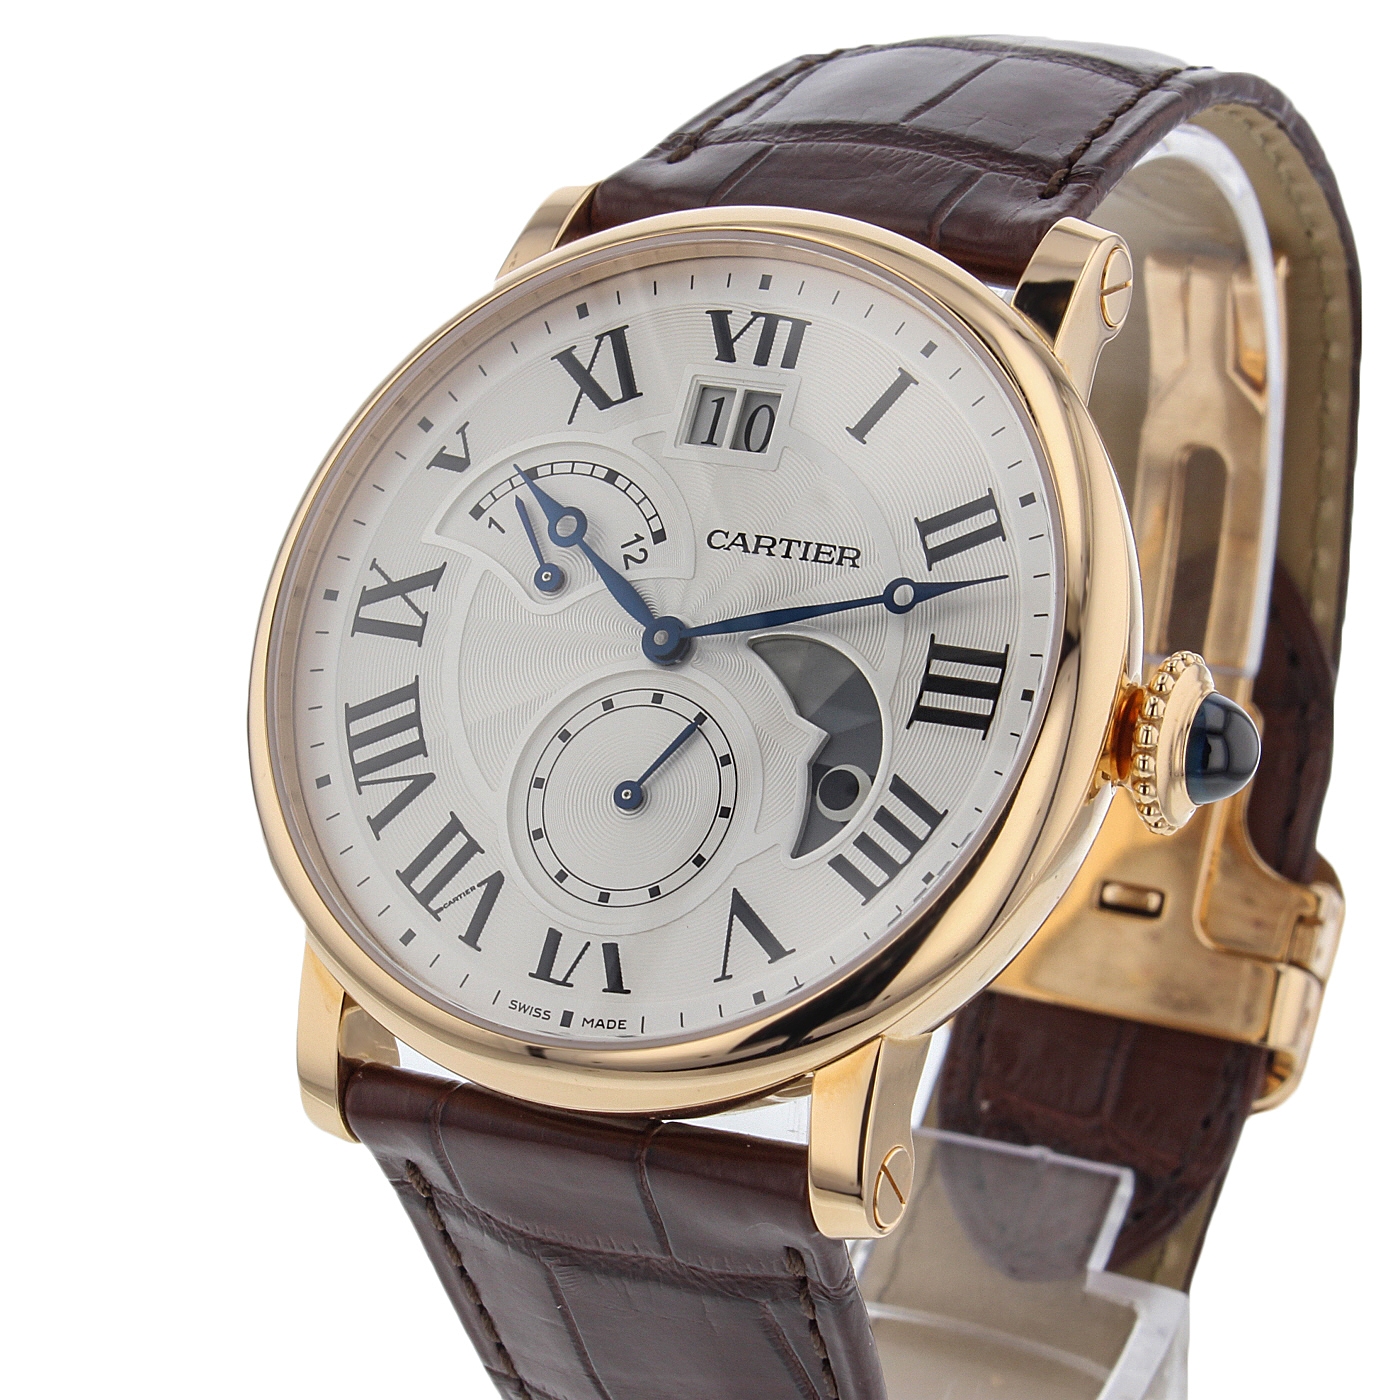 Cartier W1556240 Rotonde Retrograde Stainless Steal Automatic